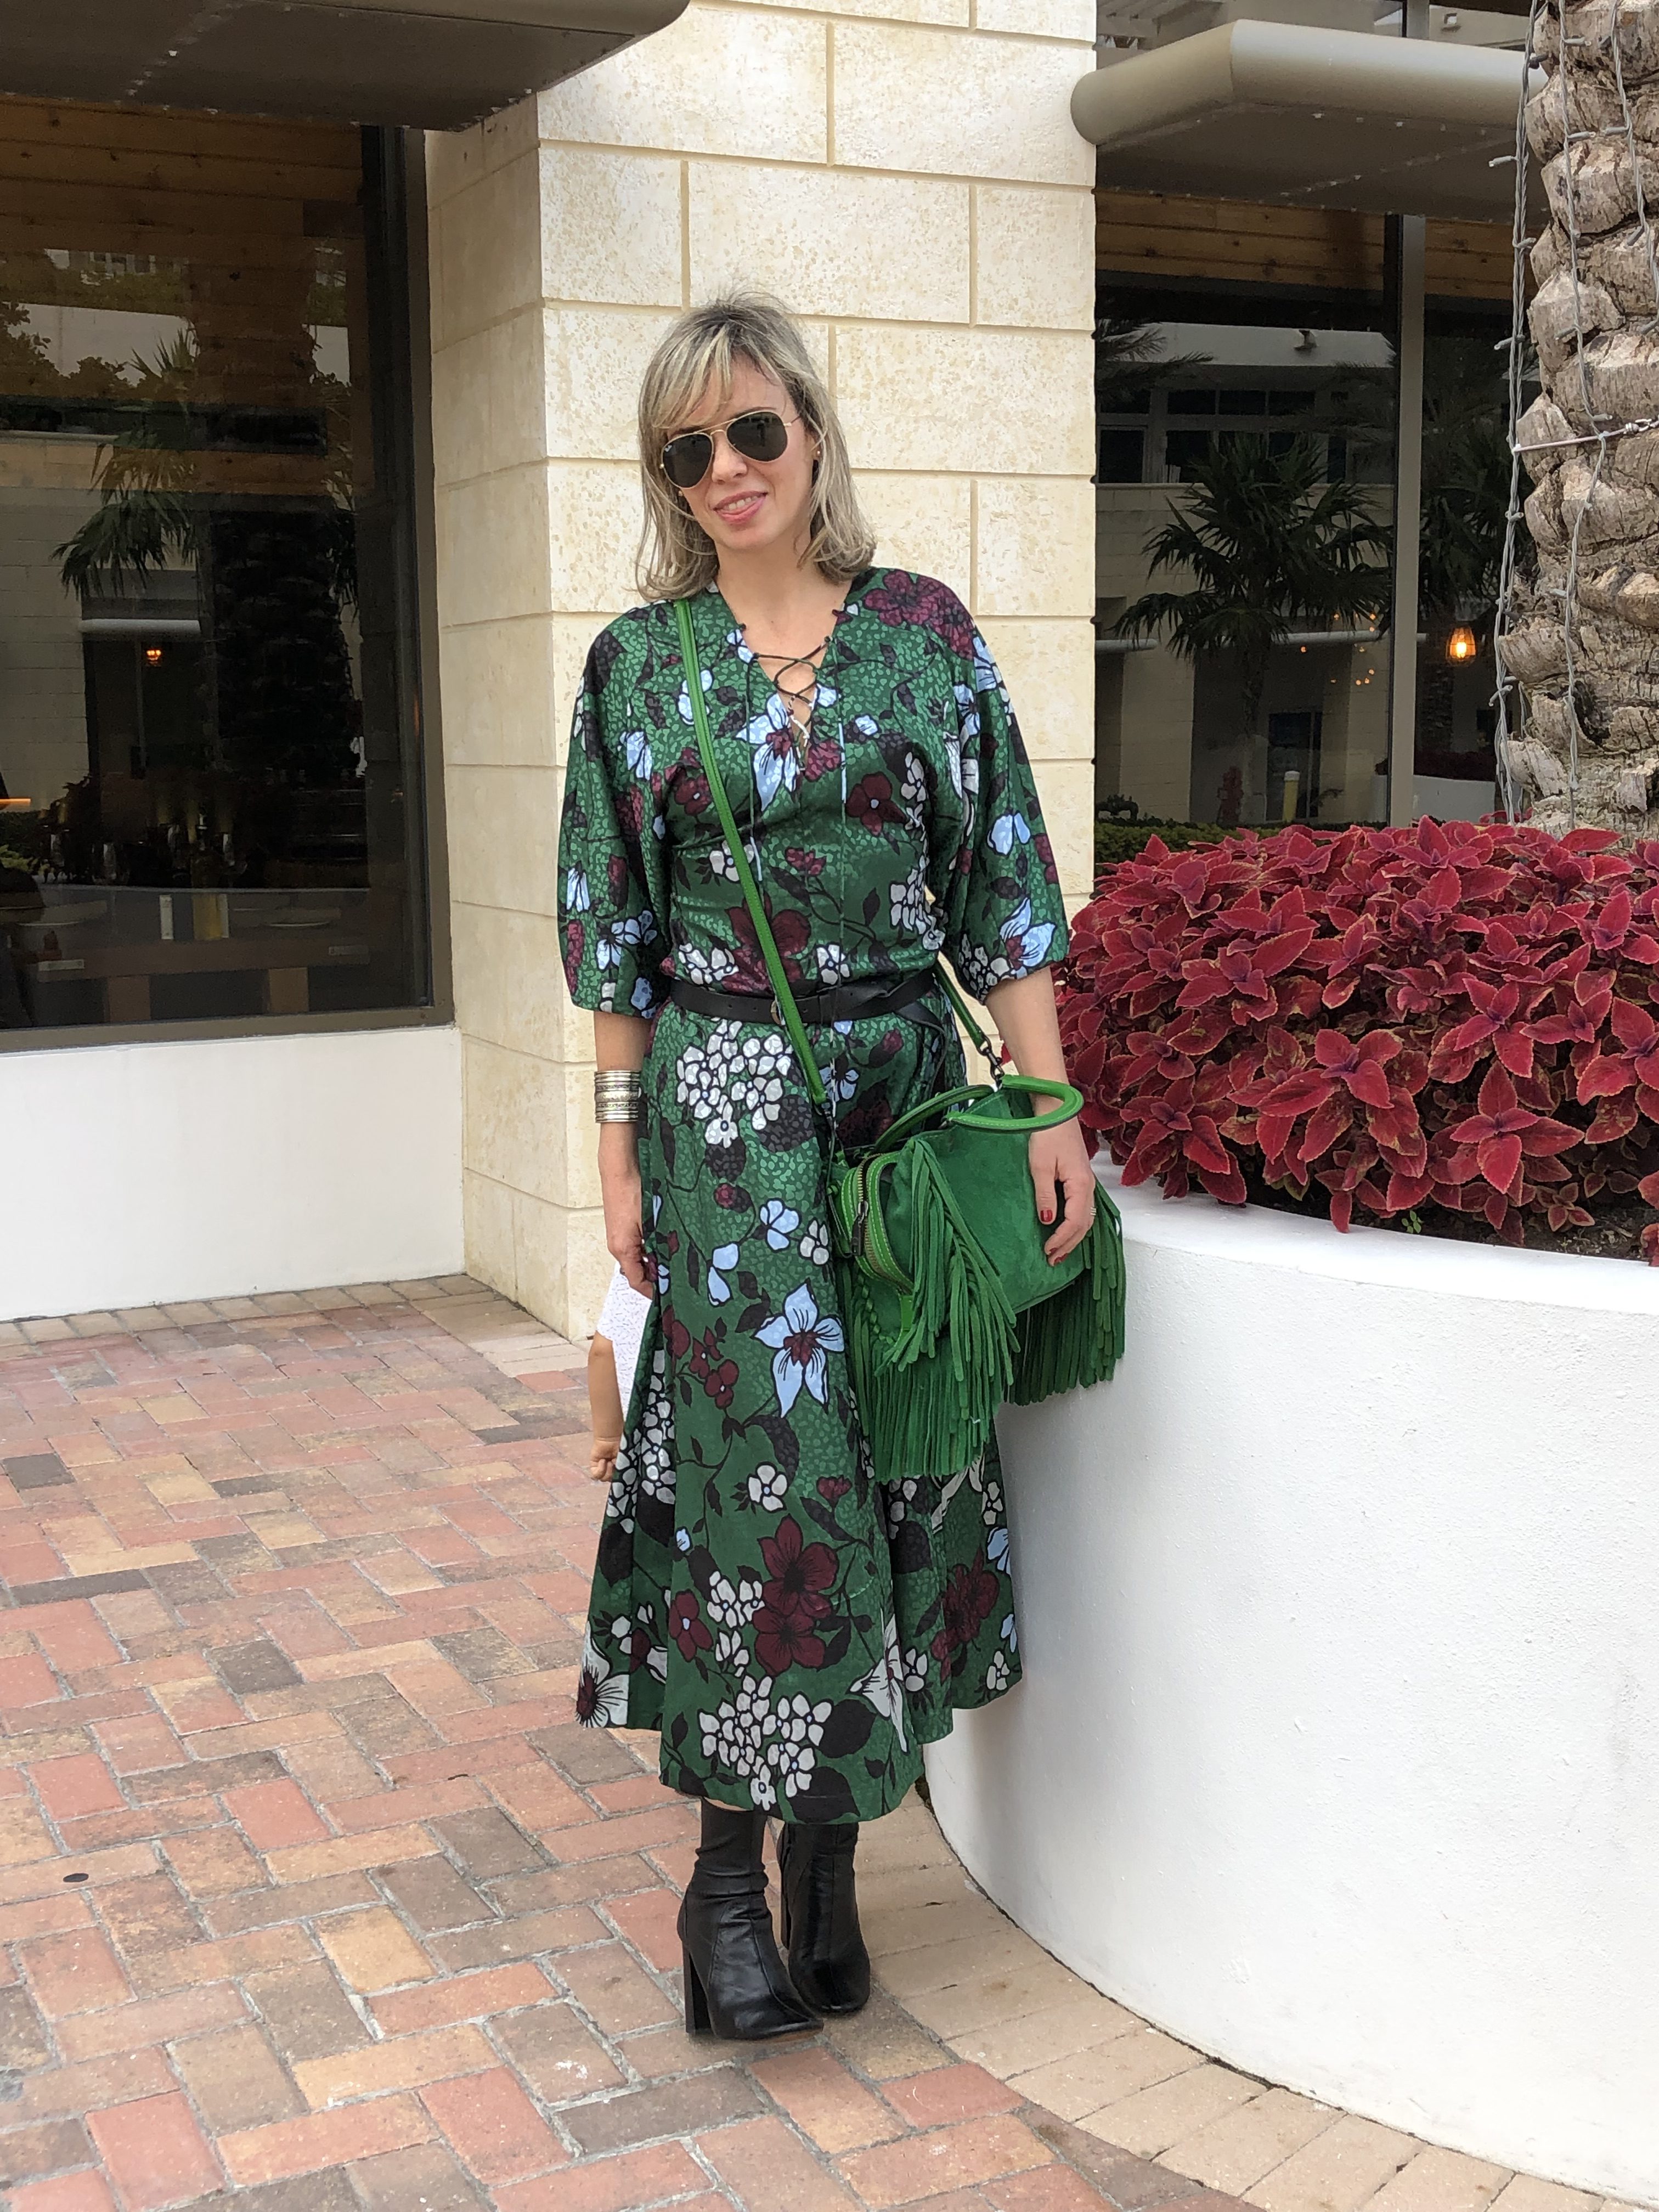 Alba Marina Otero fashion blogger from Mylovelypeople blog shares with you how to combine a vibrant green flowers dress with an ankle leather boots and a fringes green bag for a Brunch